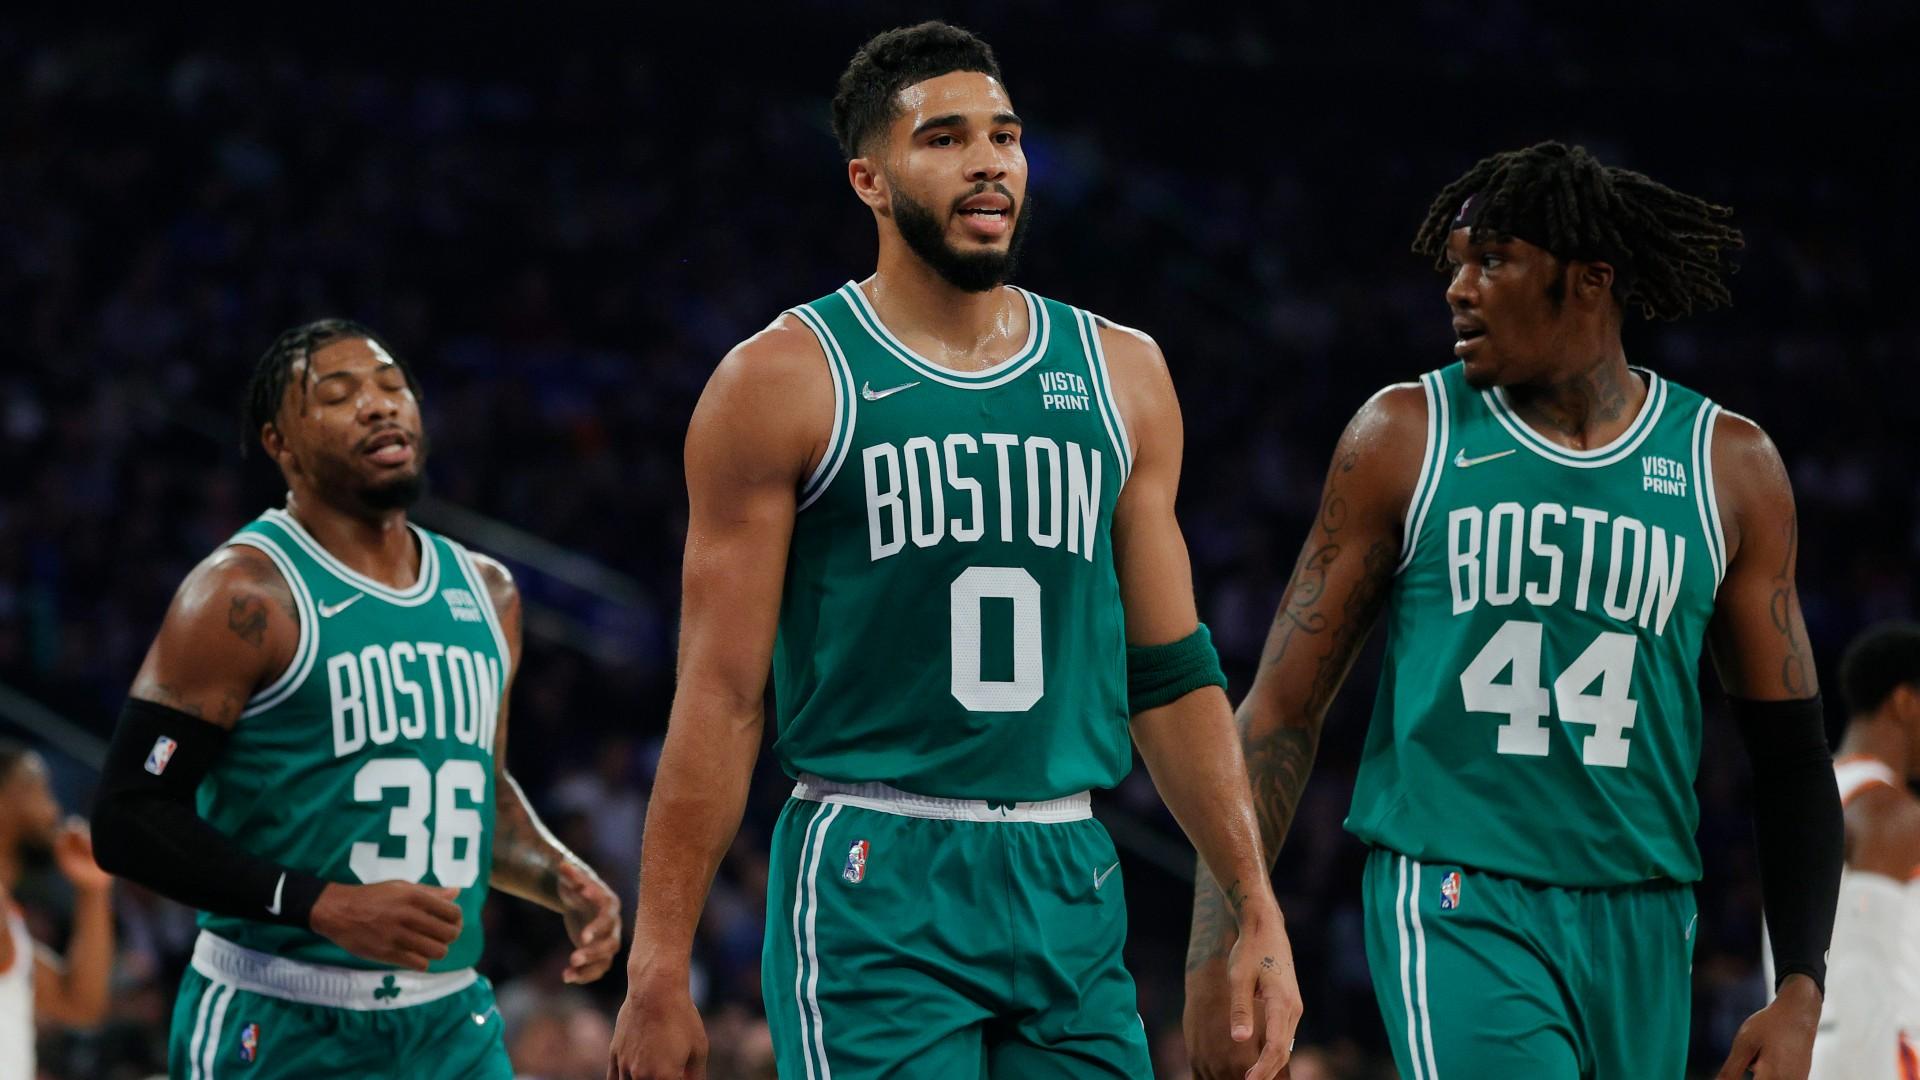 Marcus Smart wants Jayson Tatum and Jaylen Brown to 'pass the ball' more as Celtics collapse to Bulls